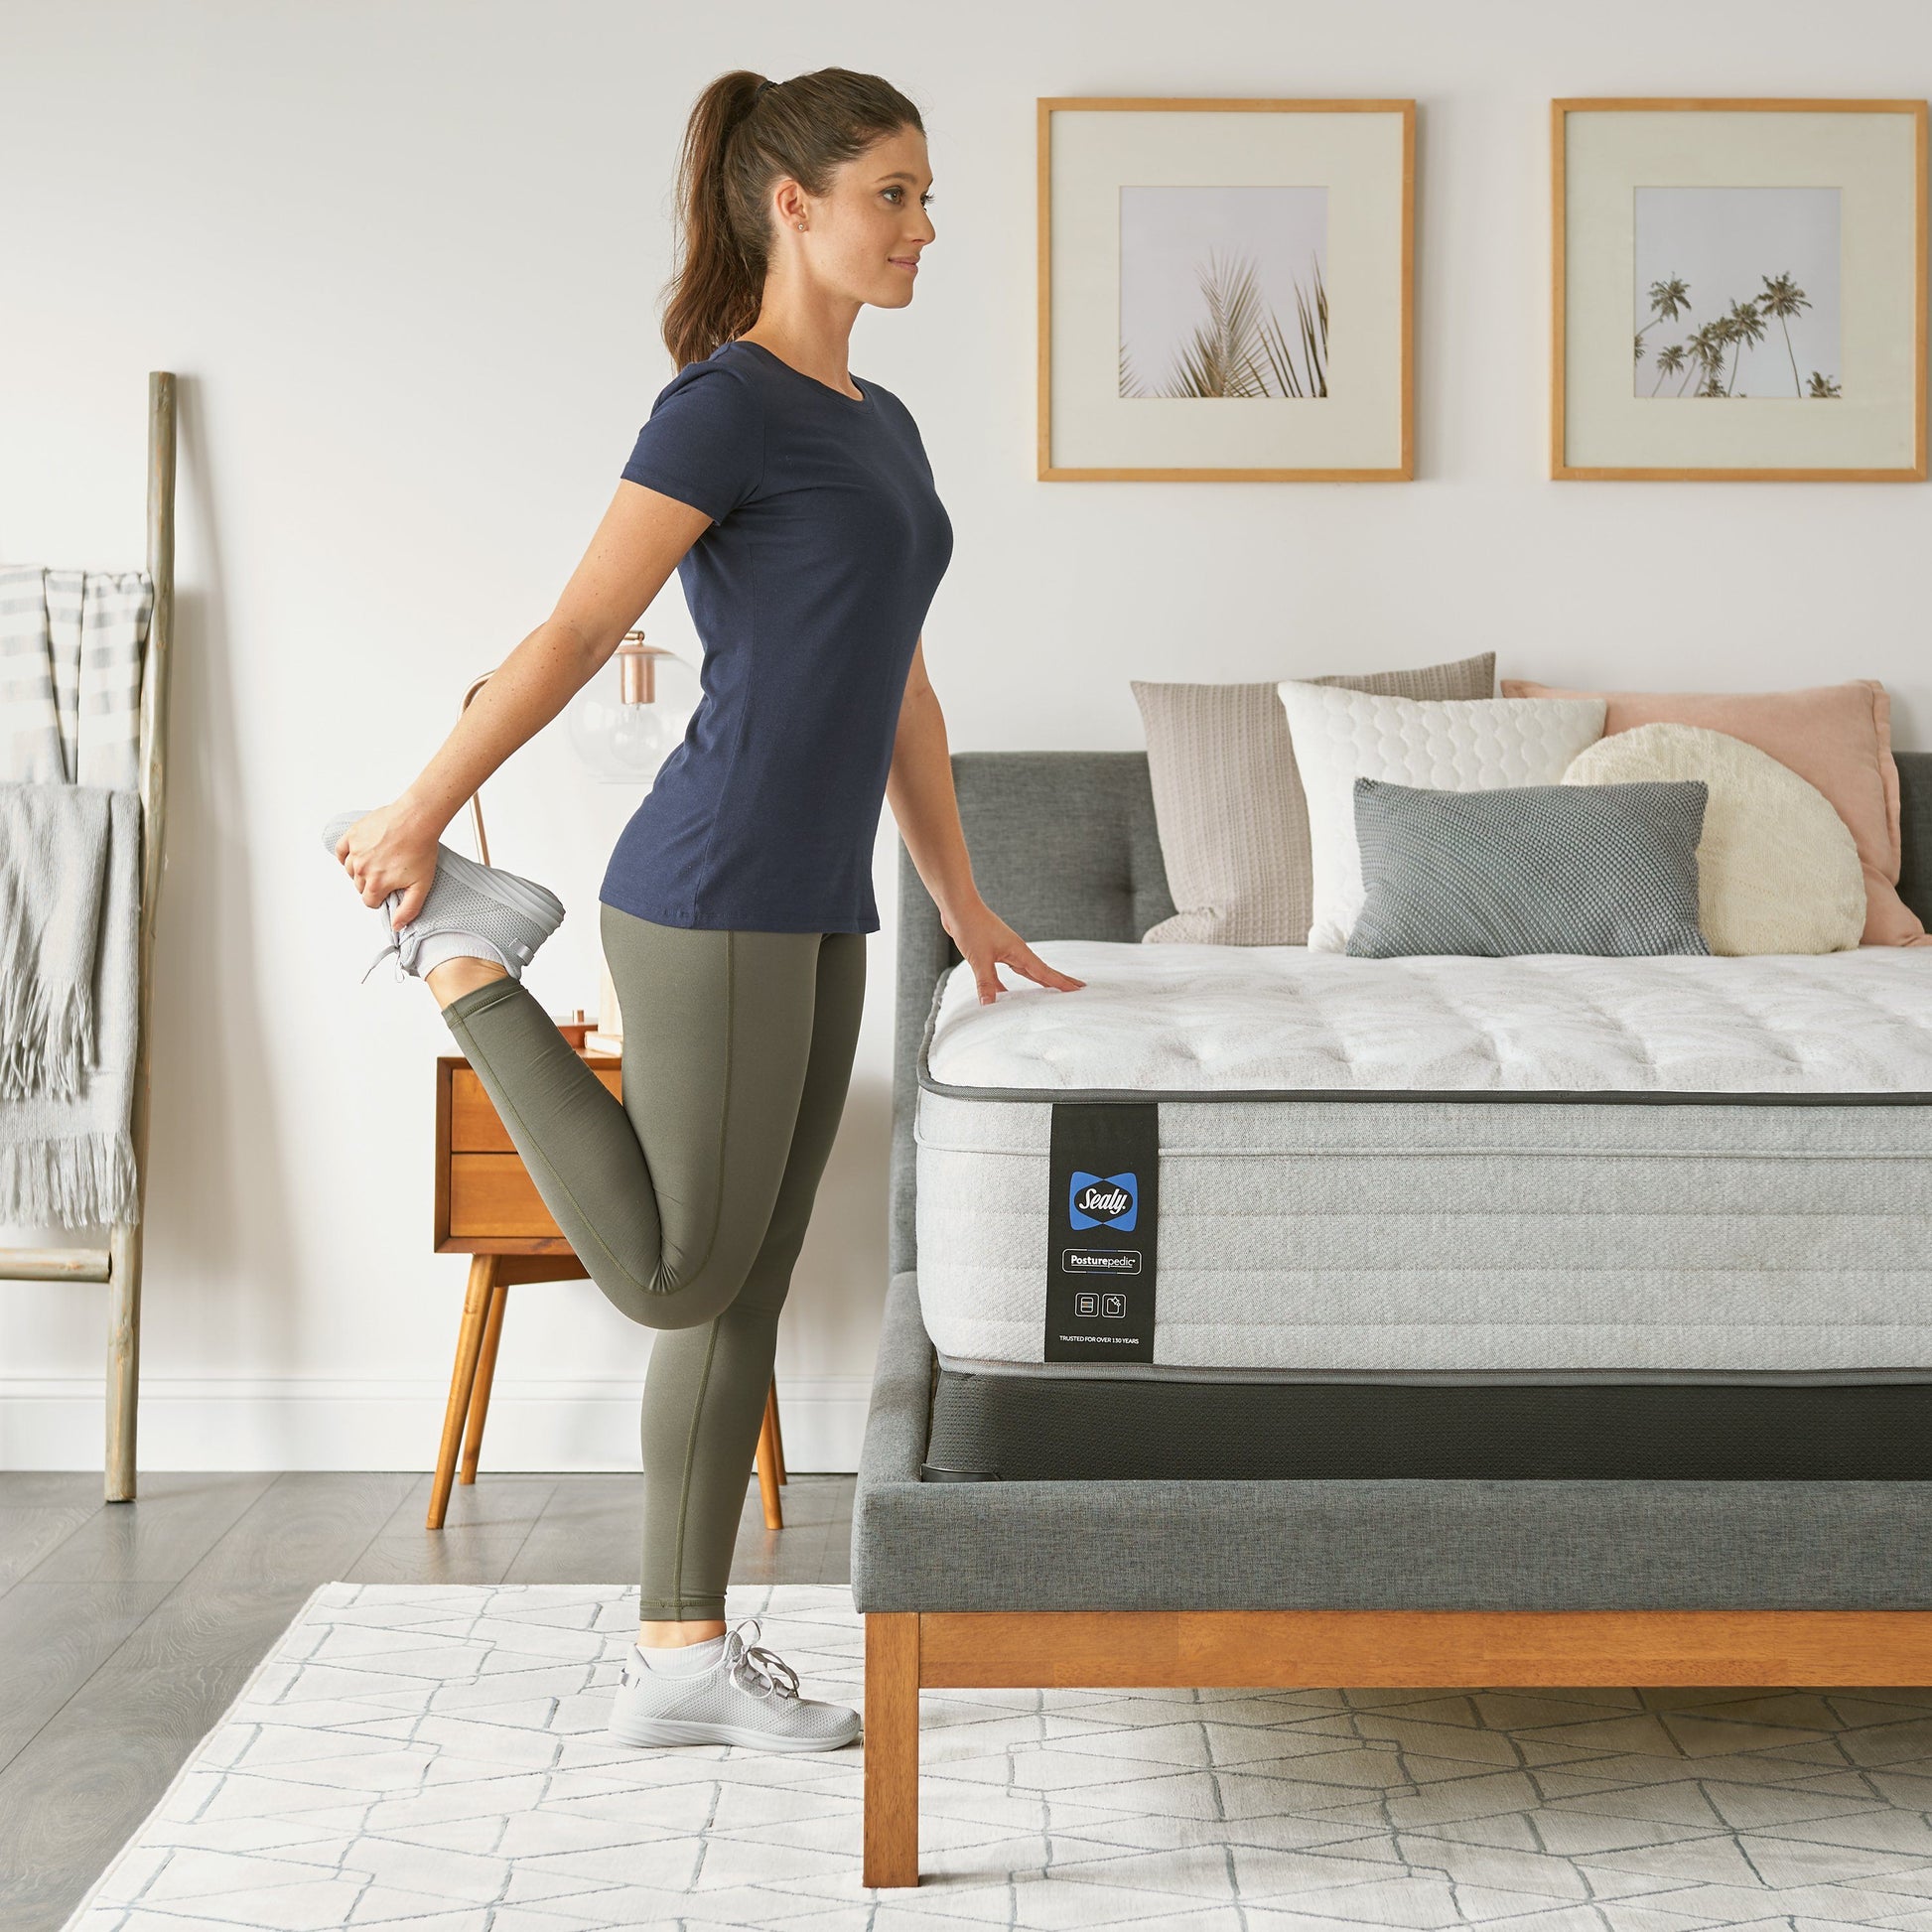 Sealy Idlewild Firm Mattress In Bedroom Woman Stretching